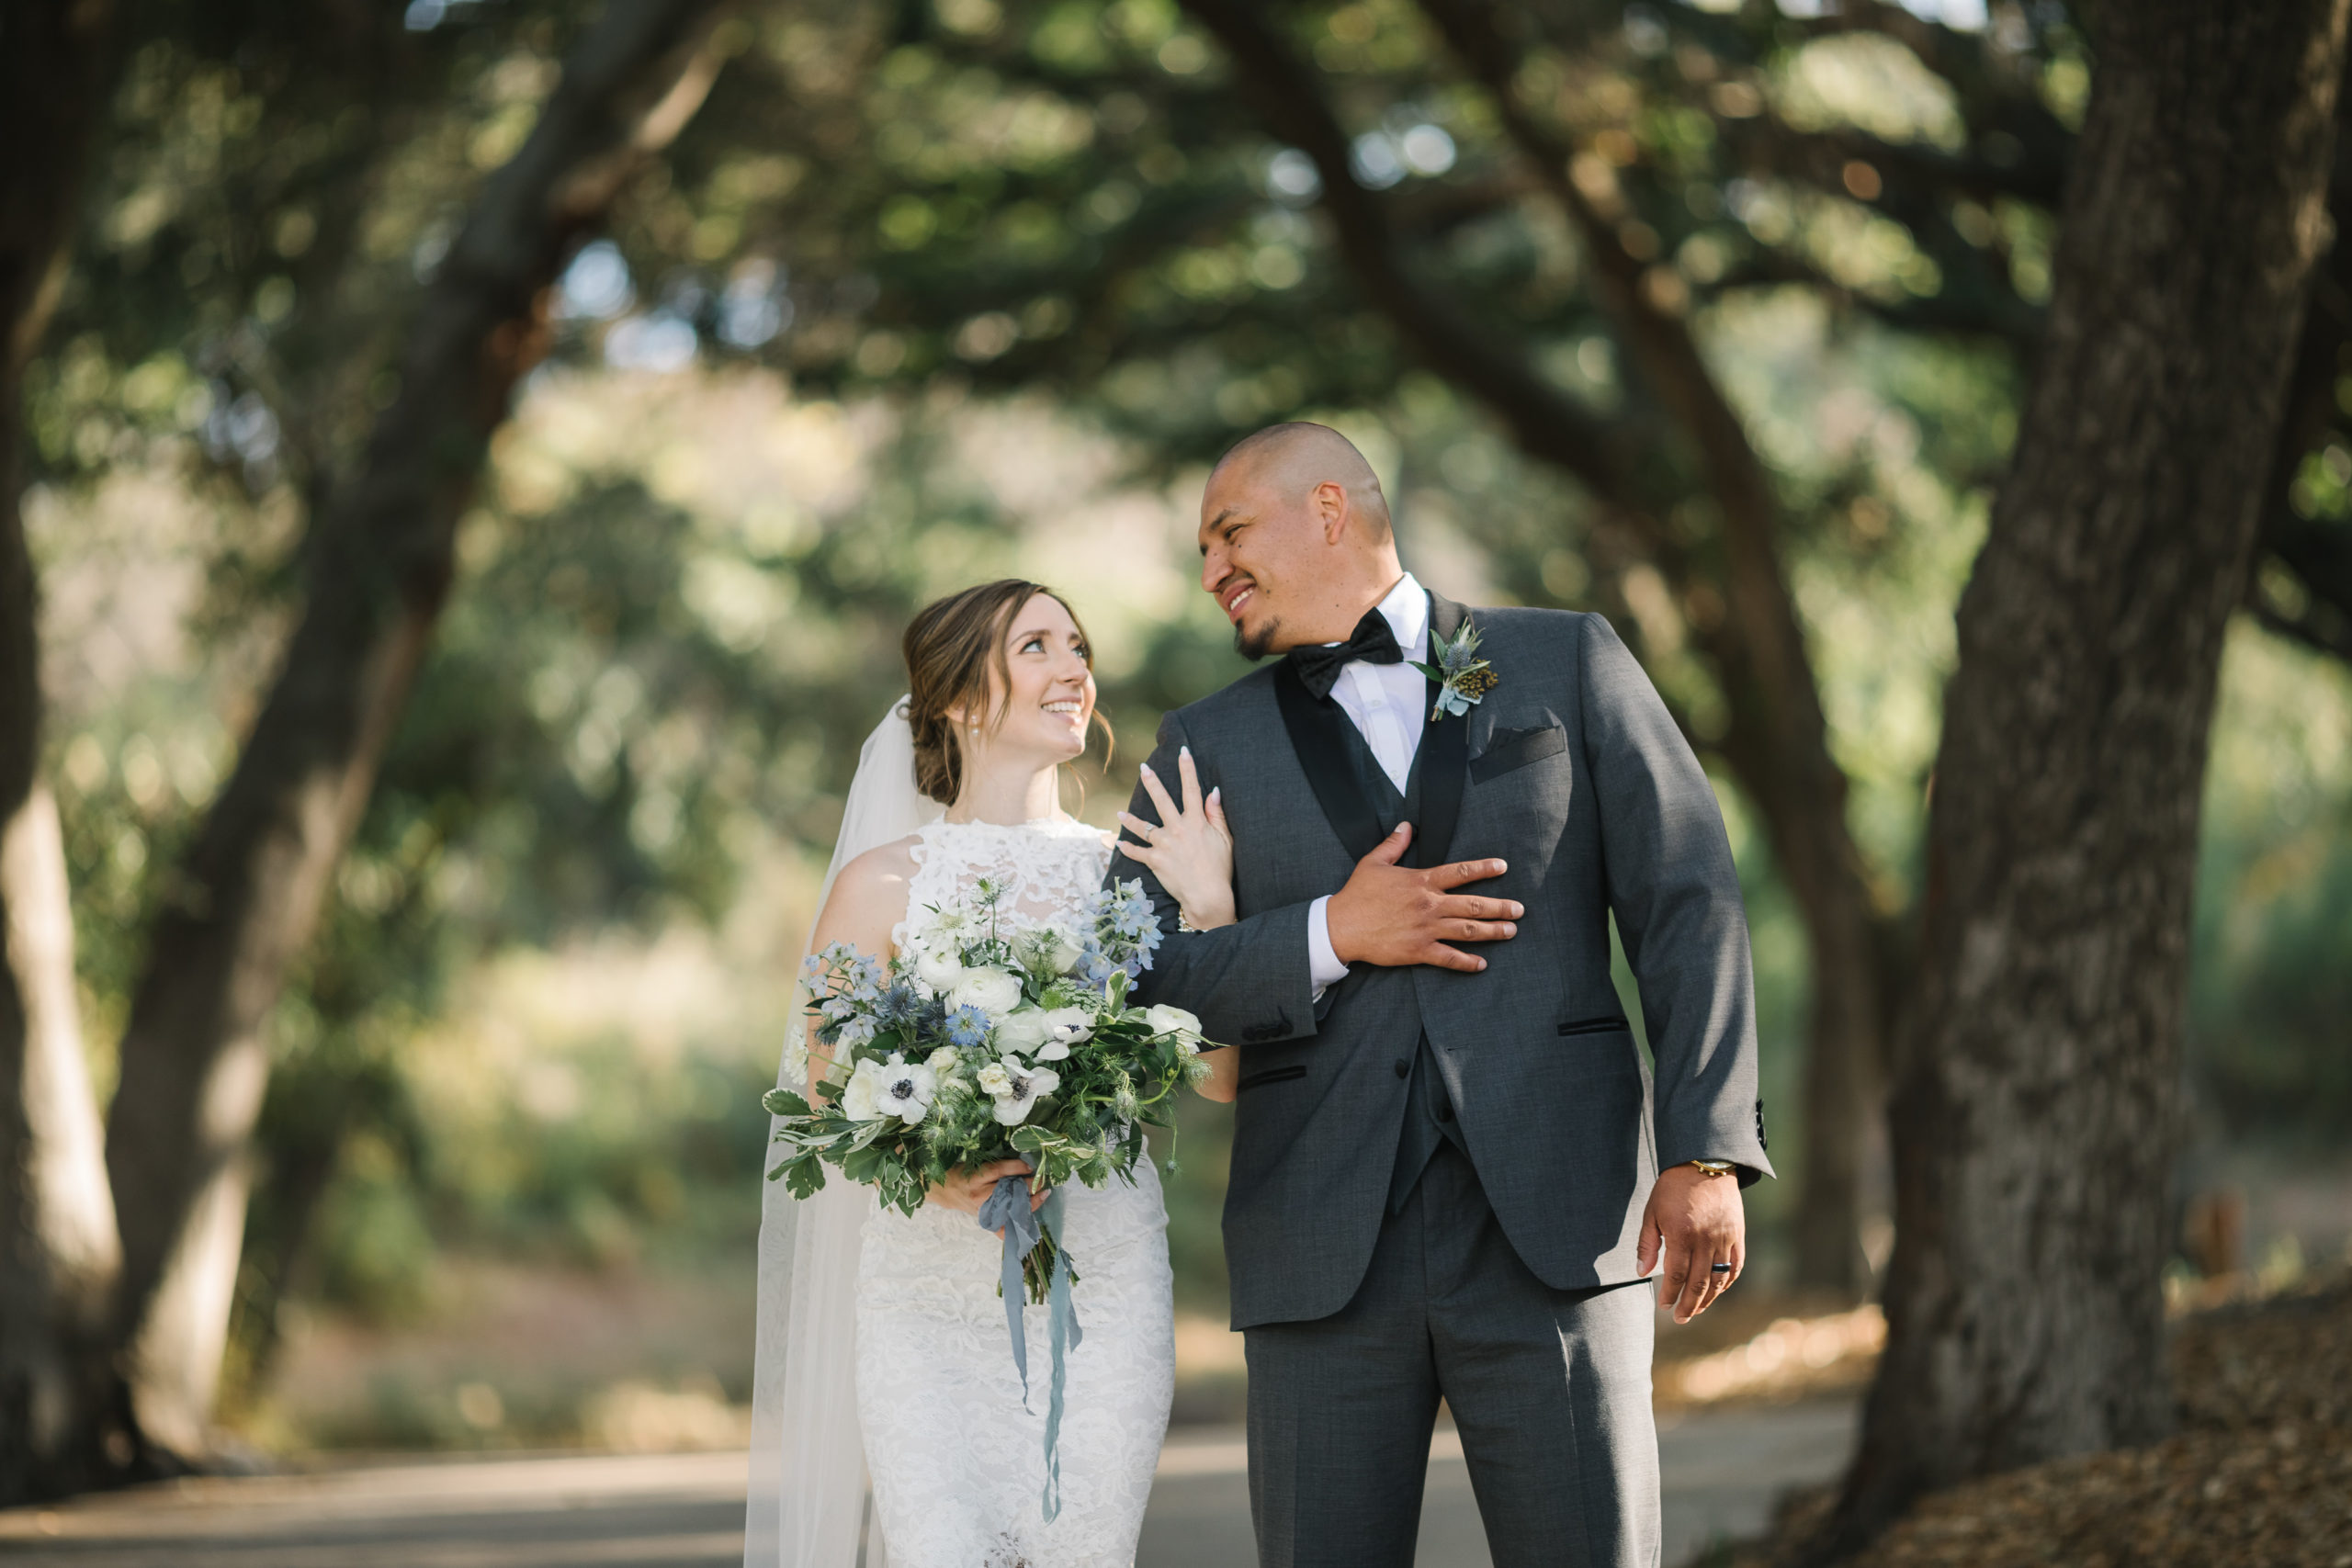 bride in high neckline lace wedding dress and white and blue bridal bouquet holds the arm of groom in dark grey suit and black bowtie